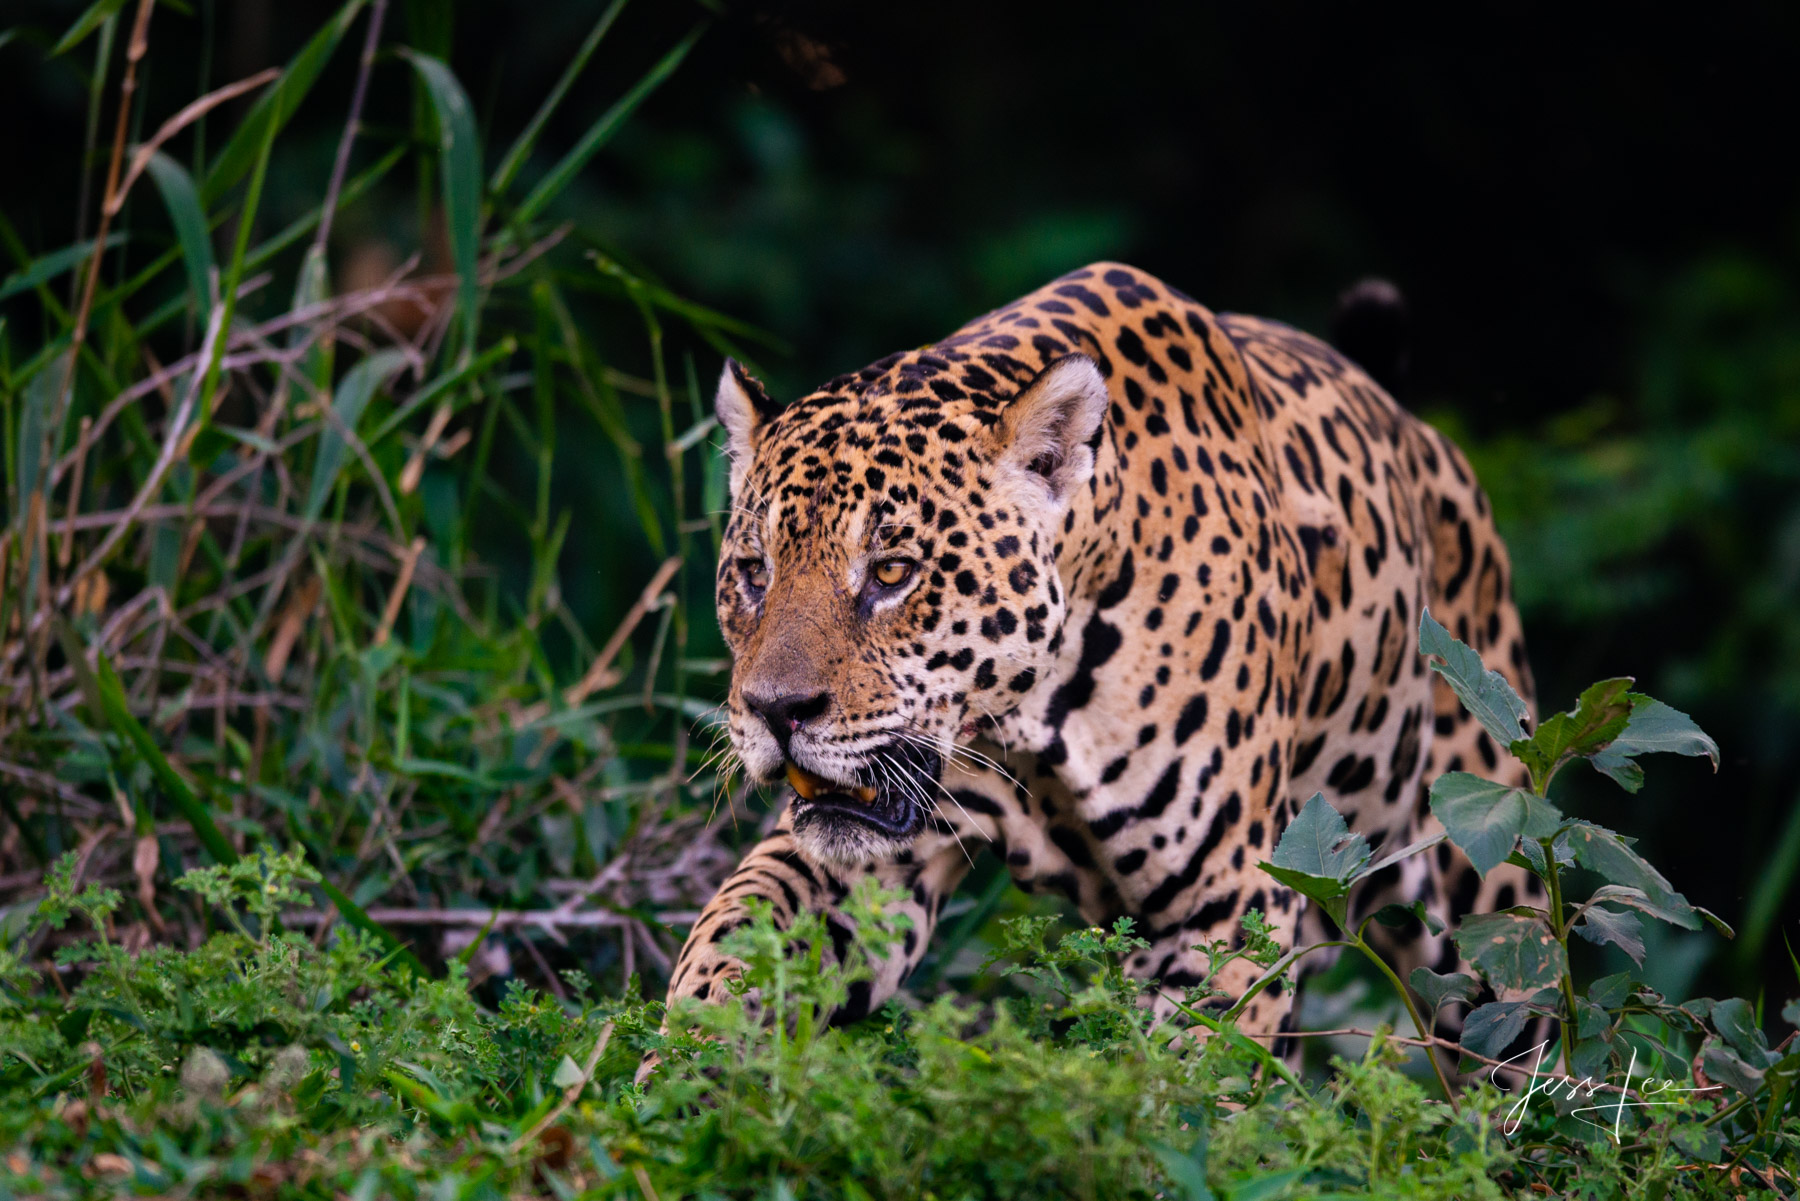 Fine art Jaguar studying its prey print limited edition of 300 luxury prints by Jess Lee. All photographs copyright © Jess Lee...